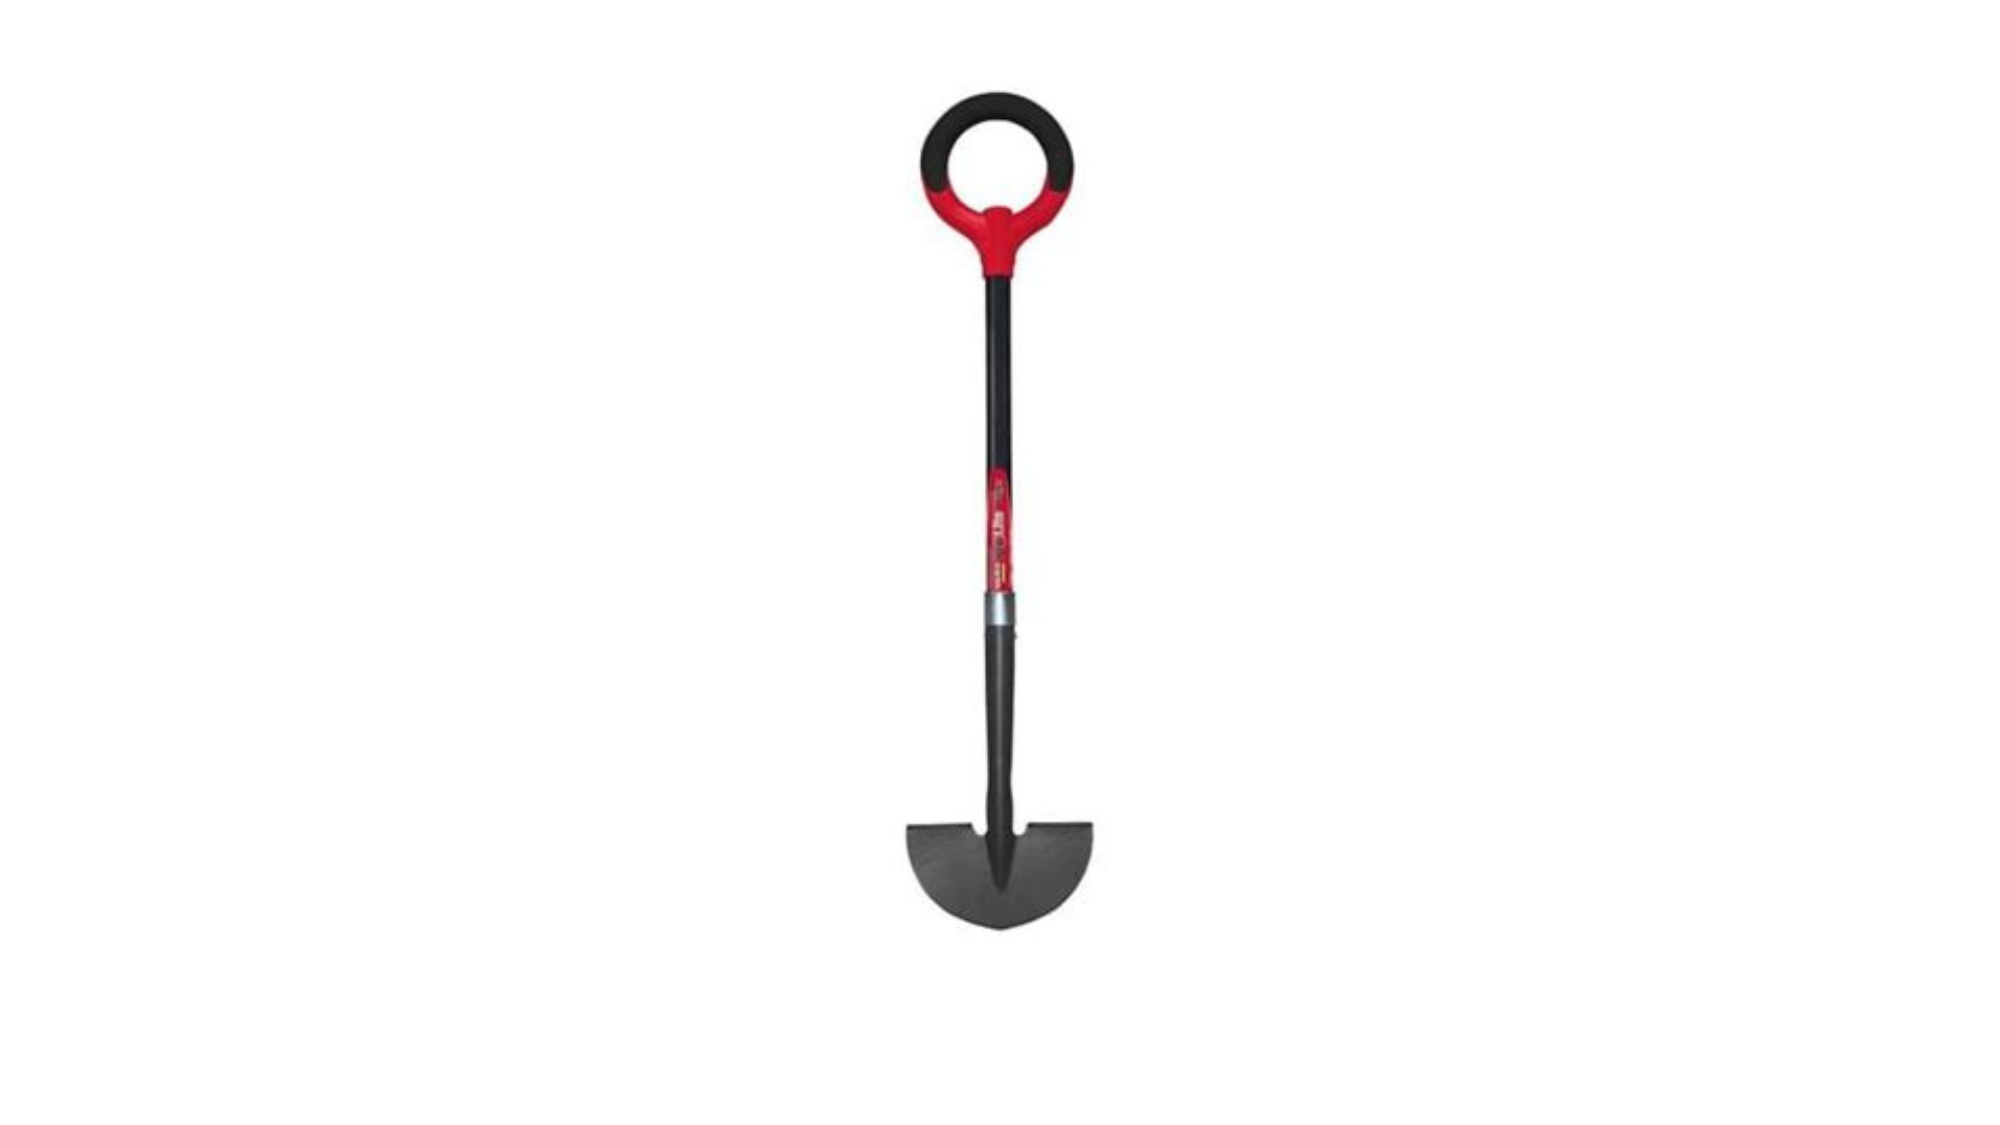 Radius Pro-Lite Manual Edger with O-shape handle and crescent blade on white background